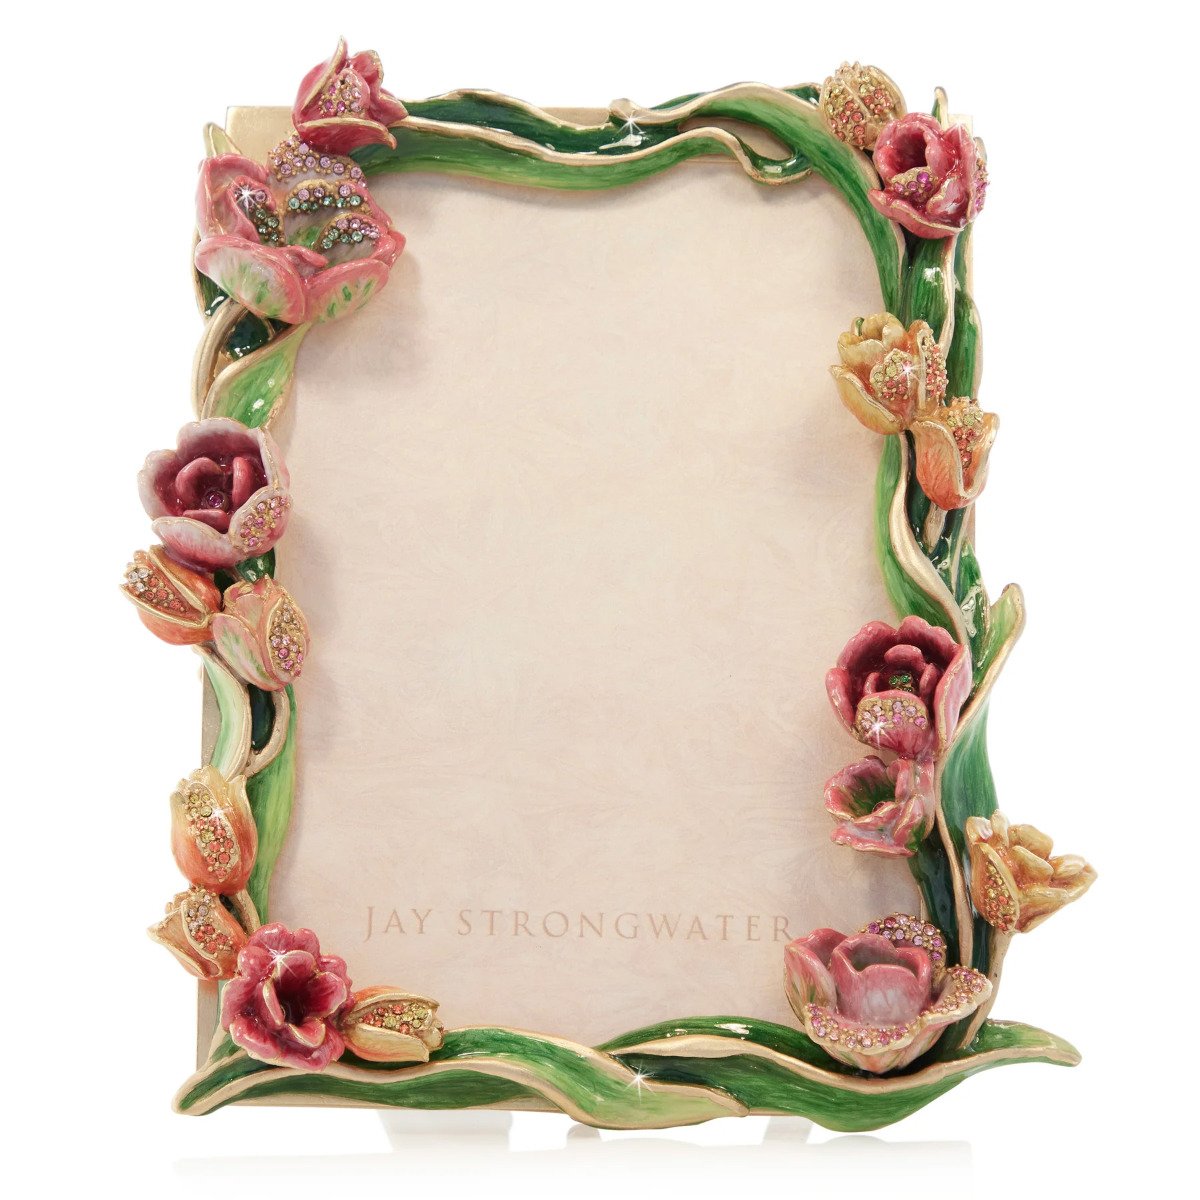 Jay Strongwater Evelyn Tulip 5" x 7" Frame - Bouquet 